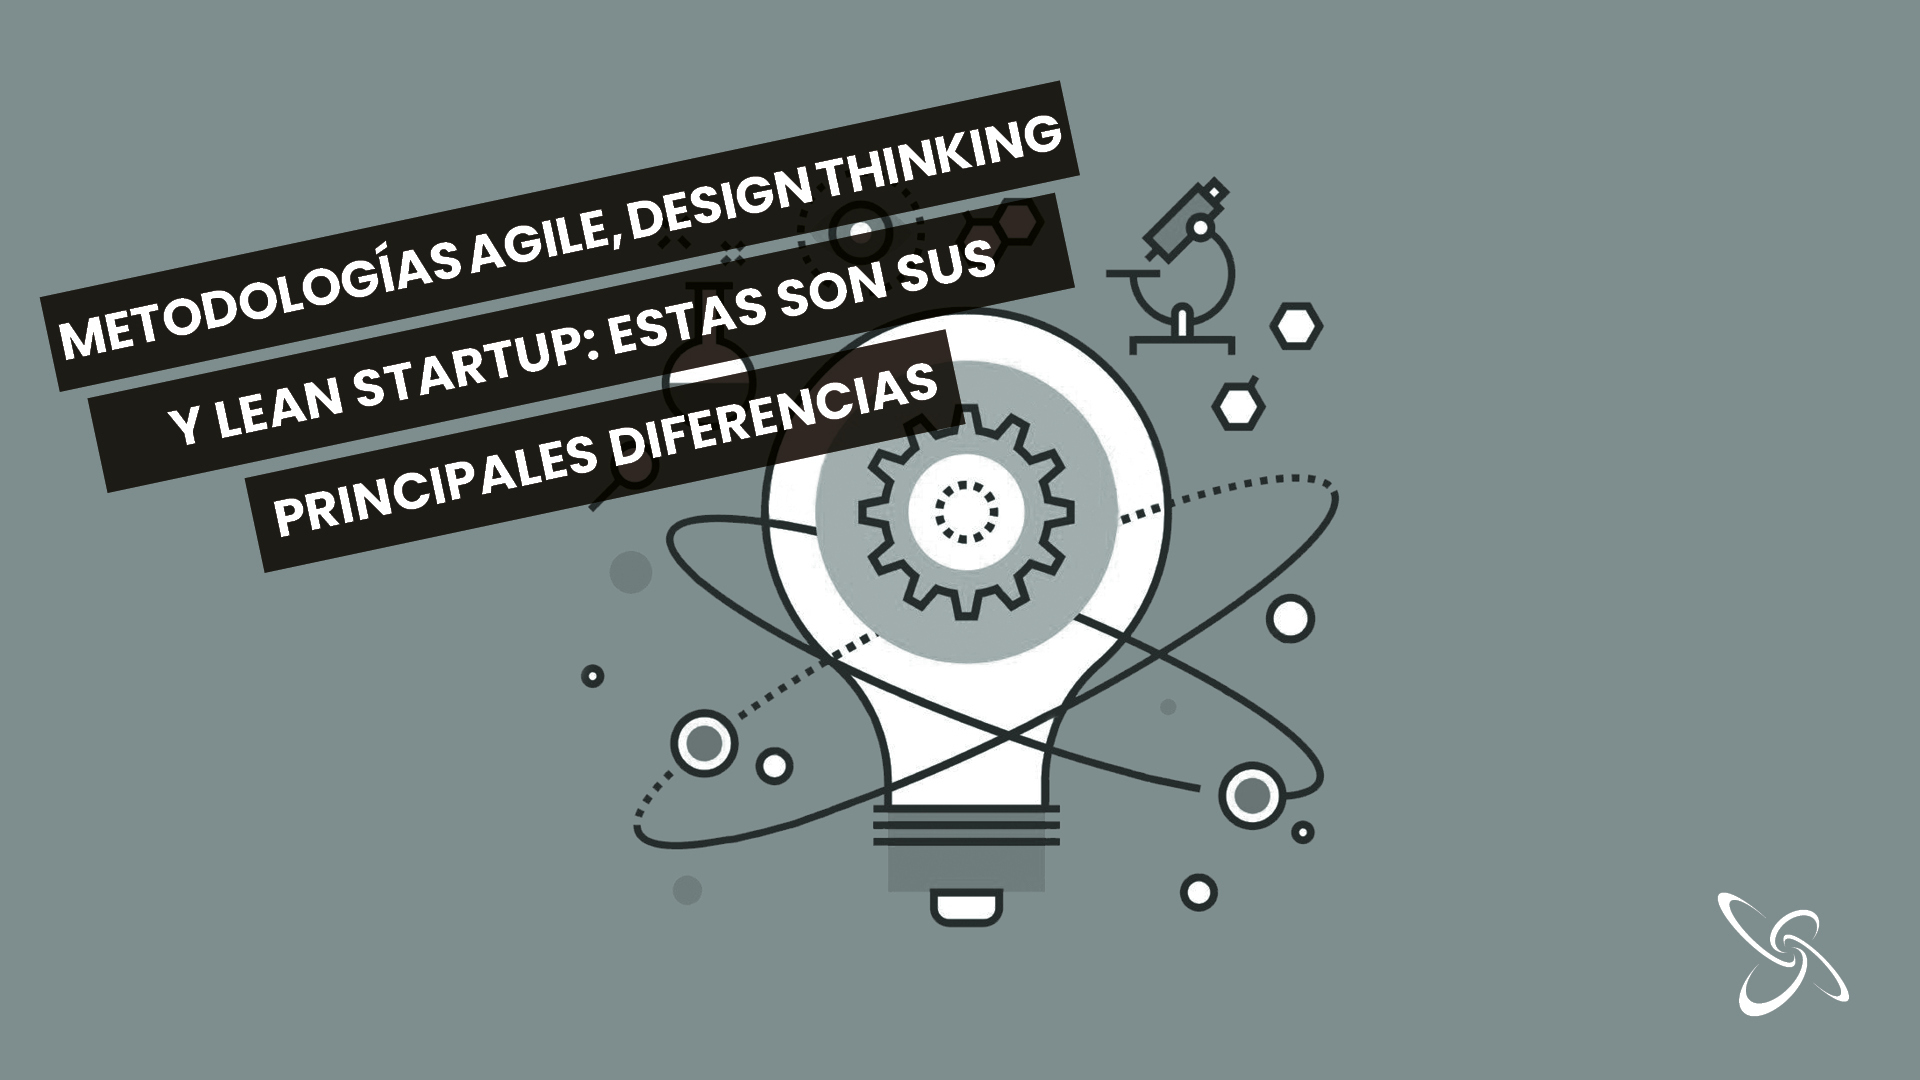 Agile Methodology, Design Thinking and Lean Startup: these are the main differences